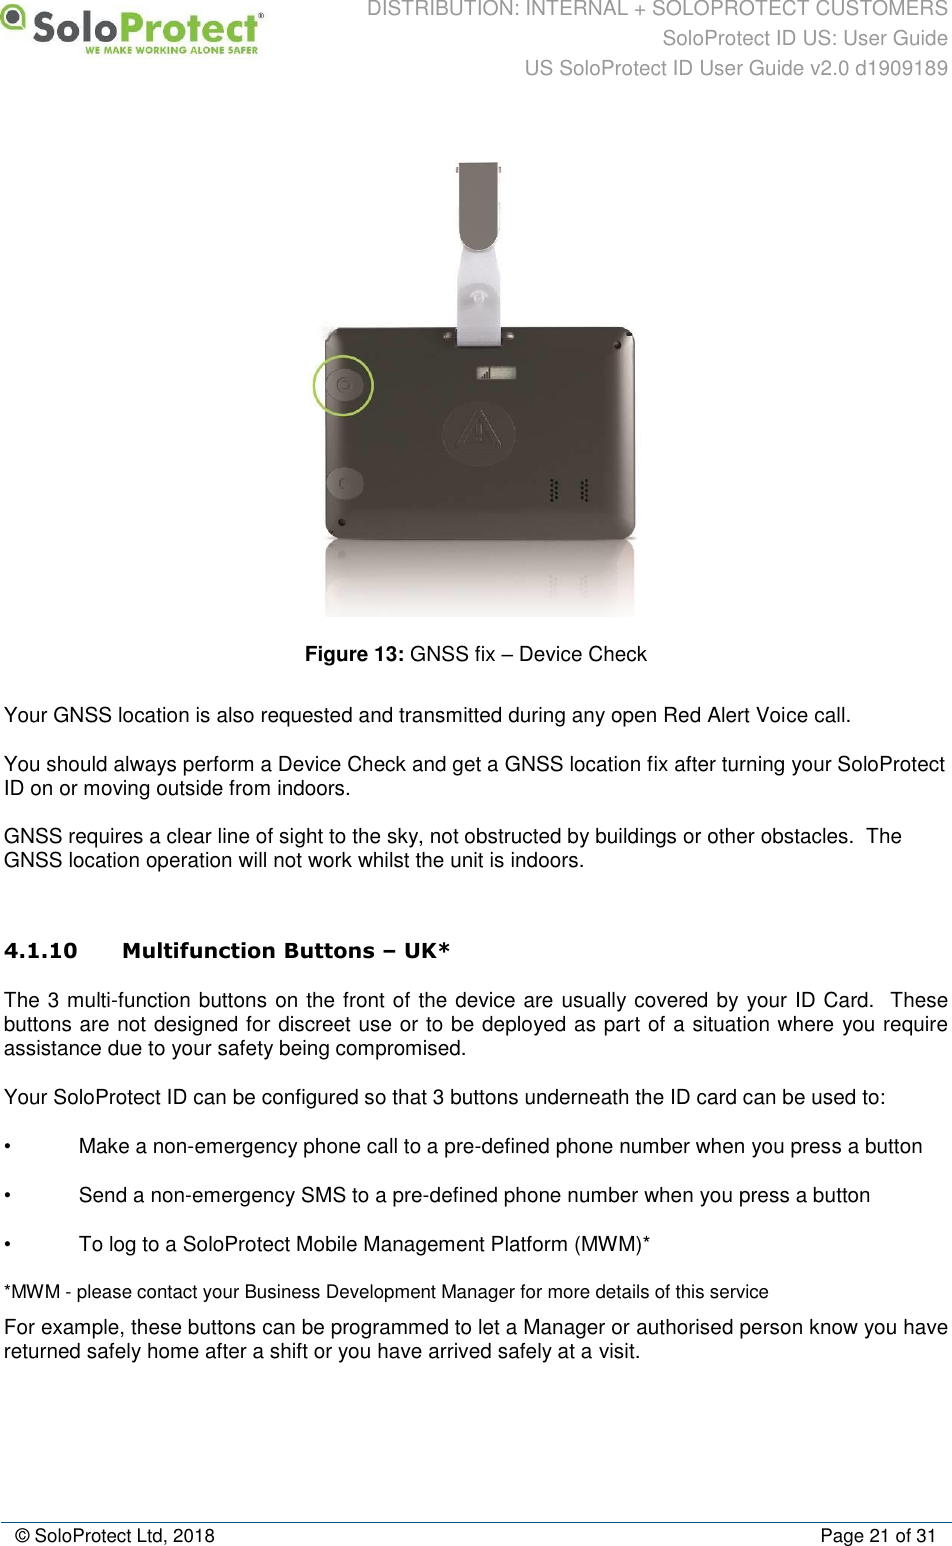 DISTRIBUTION: INTERNAL + SOLOPROTECT CUSTOMERS SoloProtect ID US: User Guide US SoloProtect ID User Guide v2.0 d1909189  © SoloProtect Ltd, 2018  Page 21 of 31  Figure 13: GNSS fix – Device Check Your GNSS location is also requested and transmitted during any open Red Alert Voice call. You should always perform a Device Check and get a GNSS location fix after turning your SoloProtect ID on or moving outside from indoors.    GNSS requires a clear line of sight to the sky, not obstructed by buildings or other obstacles.  The GNSS location operation will not work whilst the unit is indoors.  4.1.10 Multifunction Buttons – UK* The 3 multi-function buttons on the front of the device are usually covered by your ID Card.  These buttons are not designed for discreet use or to be deployed as part of a situation where you require assistance due to your safety being compromised. Your SoloProtect ID can be configured so that 3 buttons underneath the ID card can be used to: •  Make a non-emergency phone call to a pre-defined phone number when you press a button •  Send a non-emergency SMS to a pre-defined phone number when you press a button •  To log to a SoloProtect Mobile Management Platform (MWM)* *MWM - please contact your Business Development Manager for more details of this service For example, these buttons can be programmed to let a Manager or authorised person know you have returned safely home after a shift or you have arrived safely at a visit. 